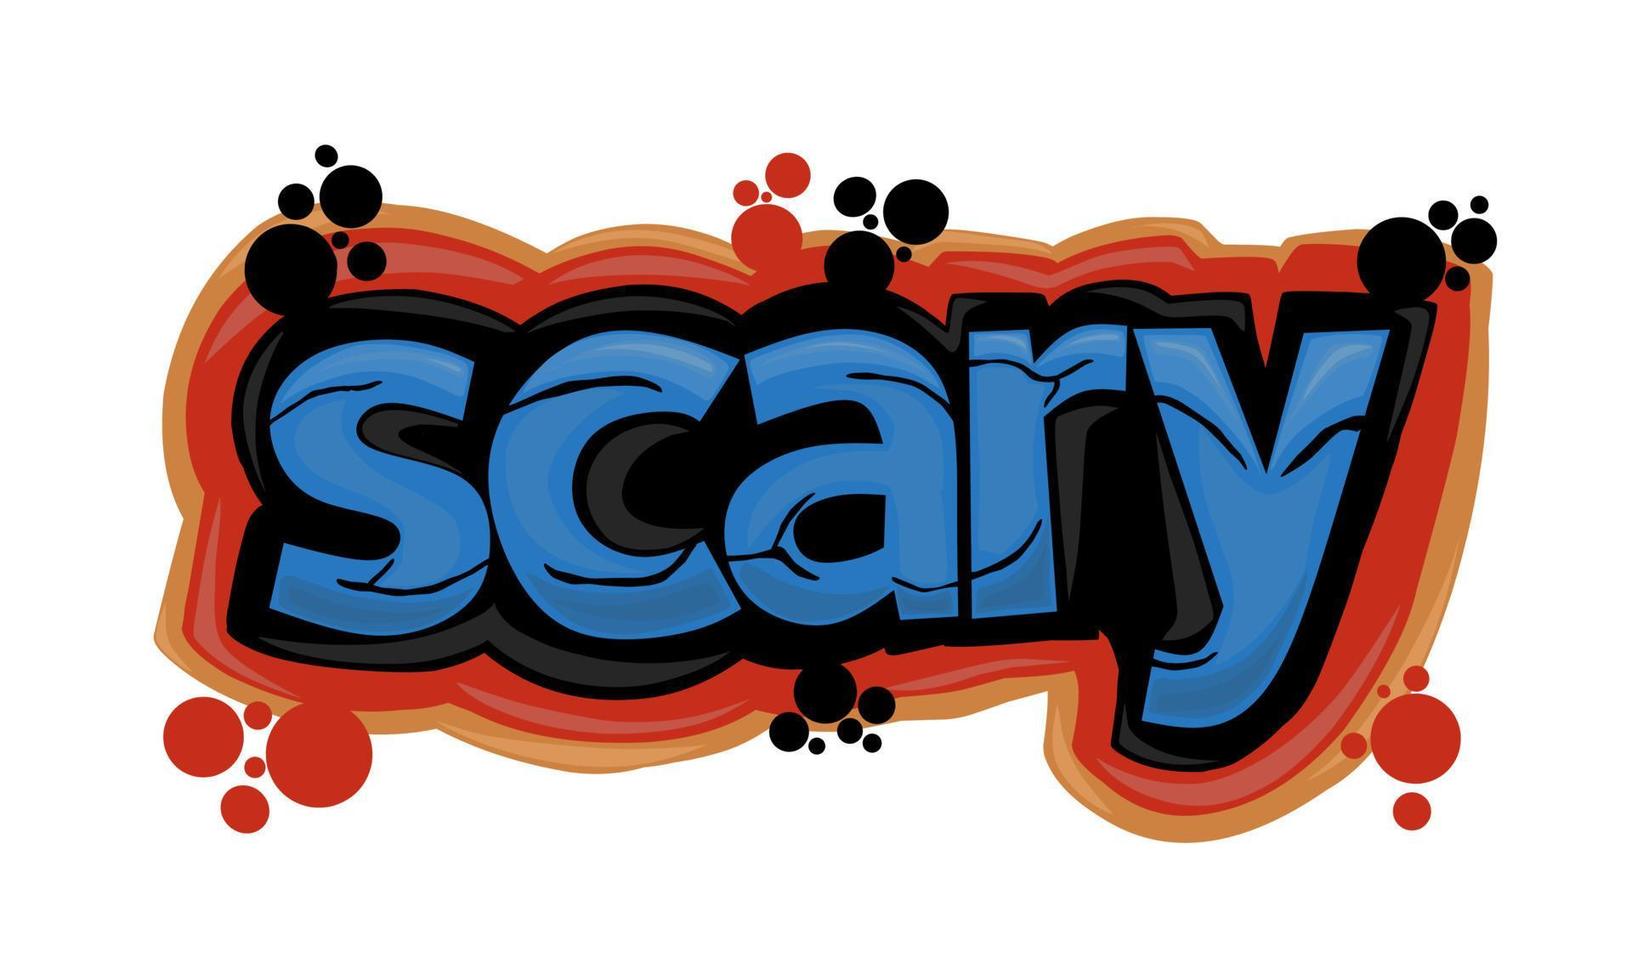 SCARY writing graffiti design on a white background vector